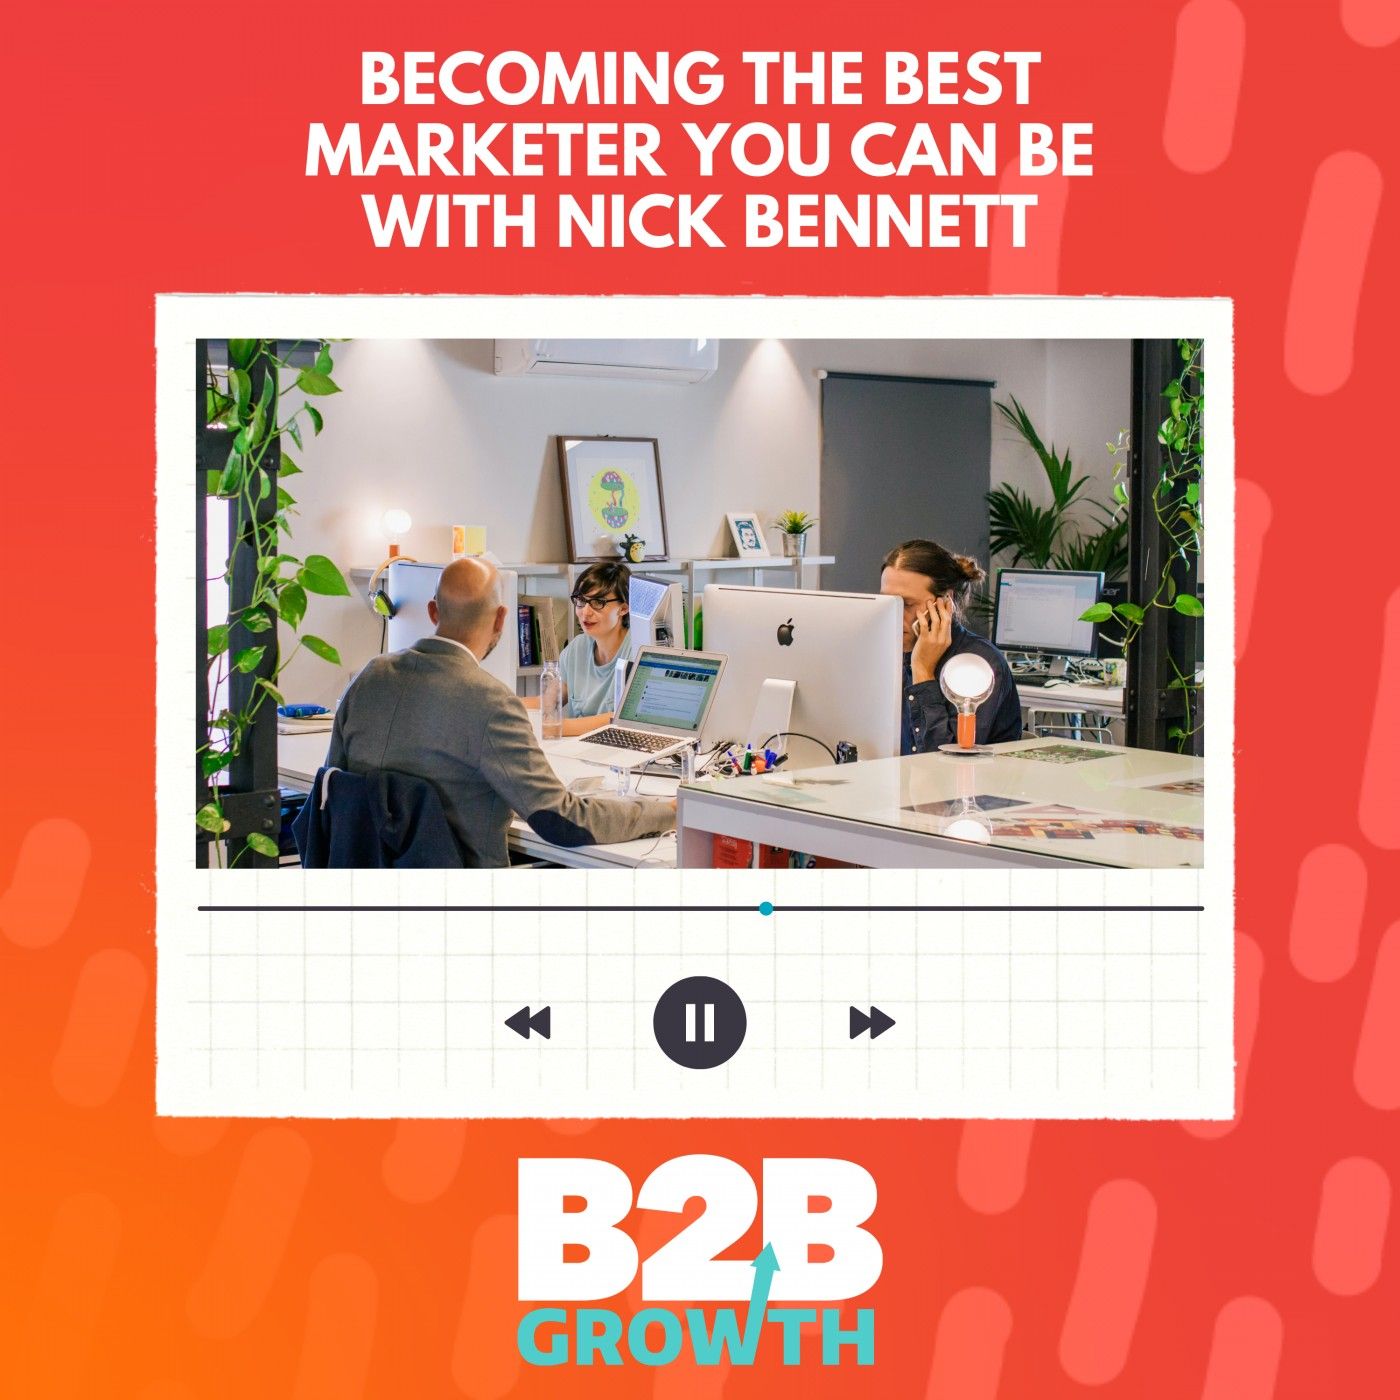 Becoming the Best Marketer You Can Be, with Nick Bennett